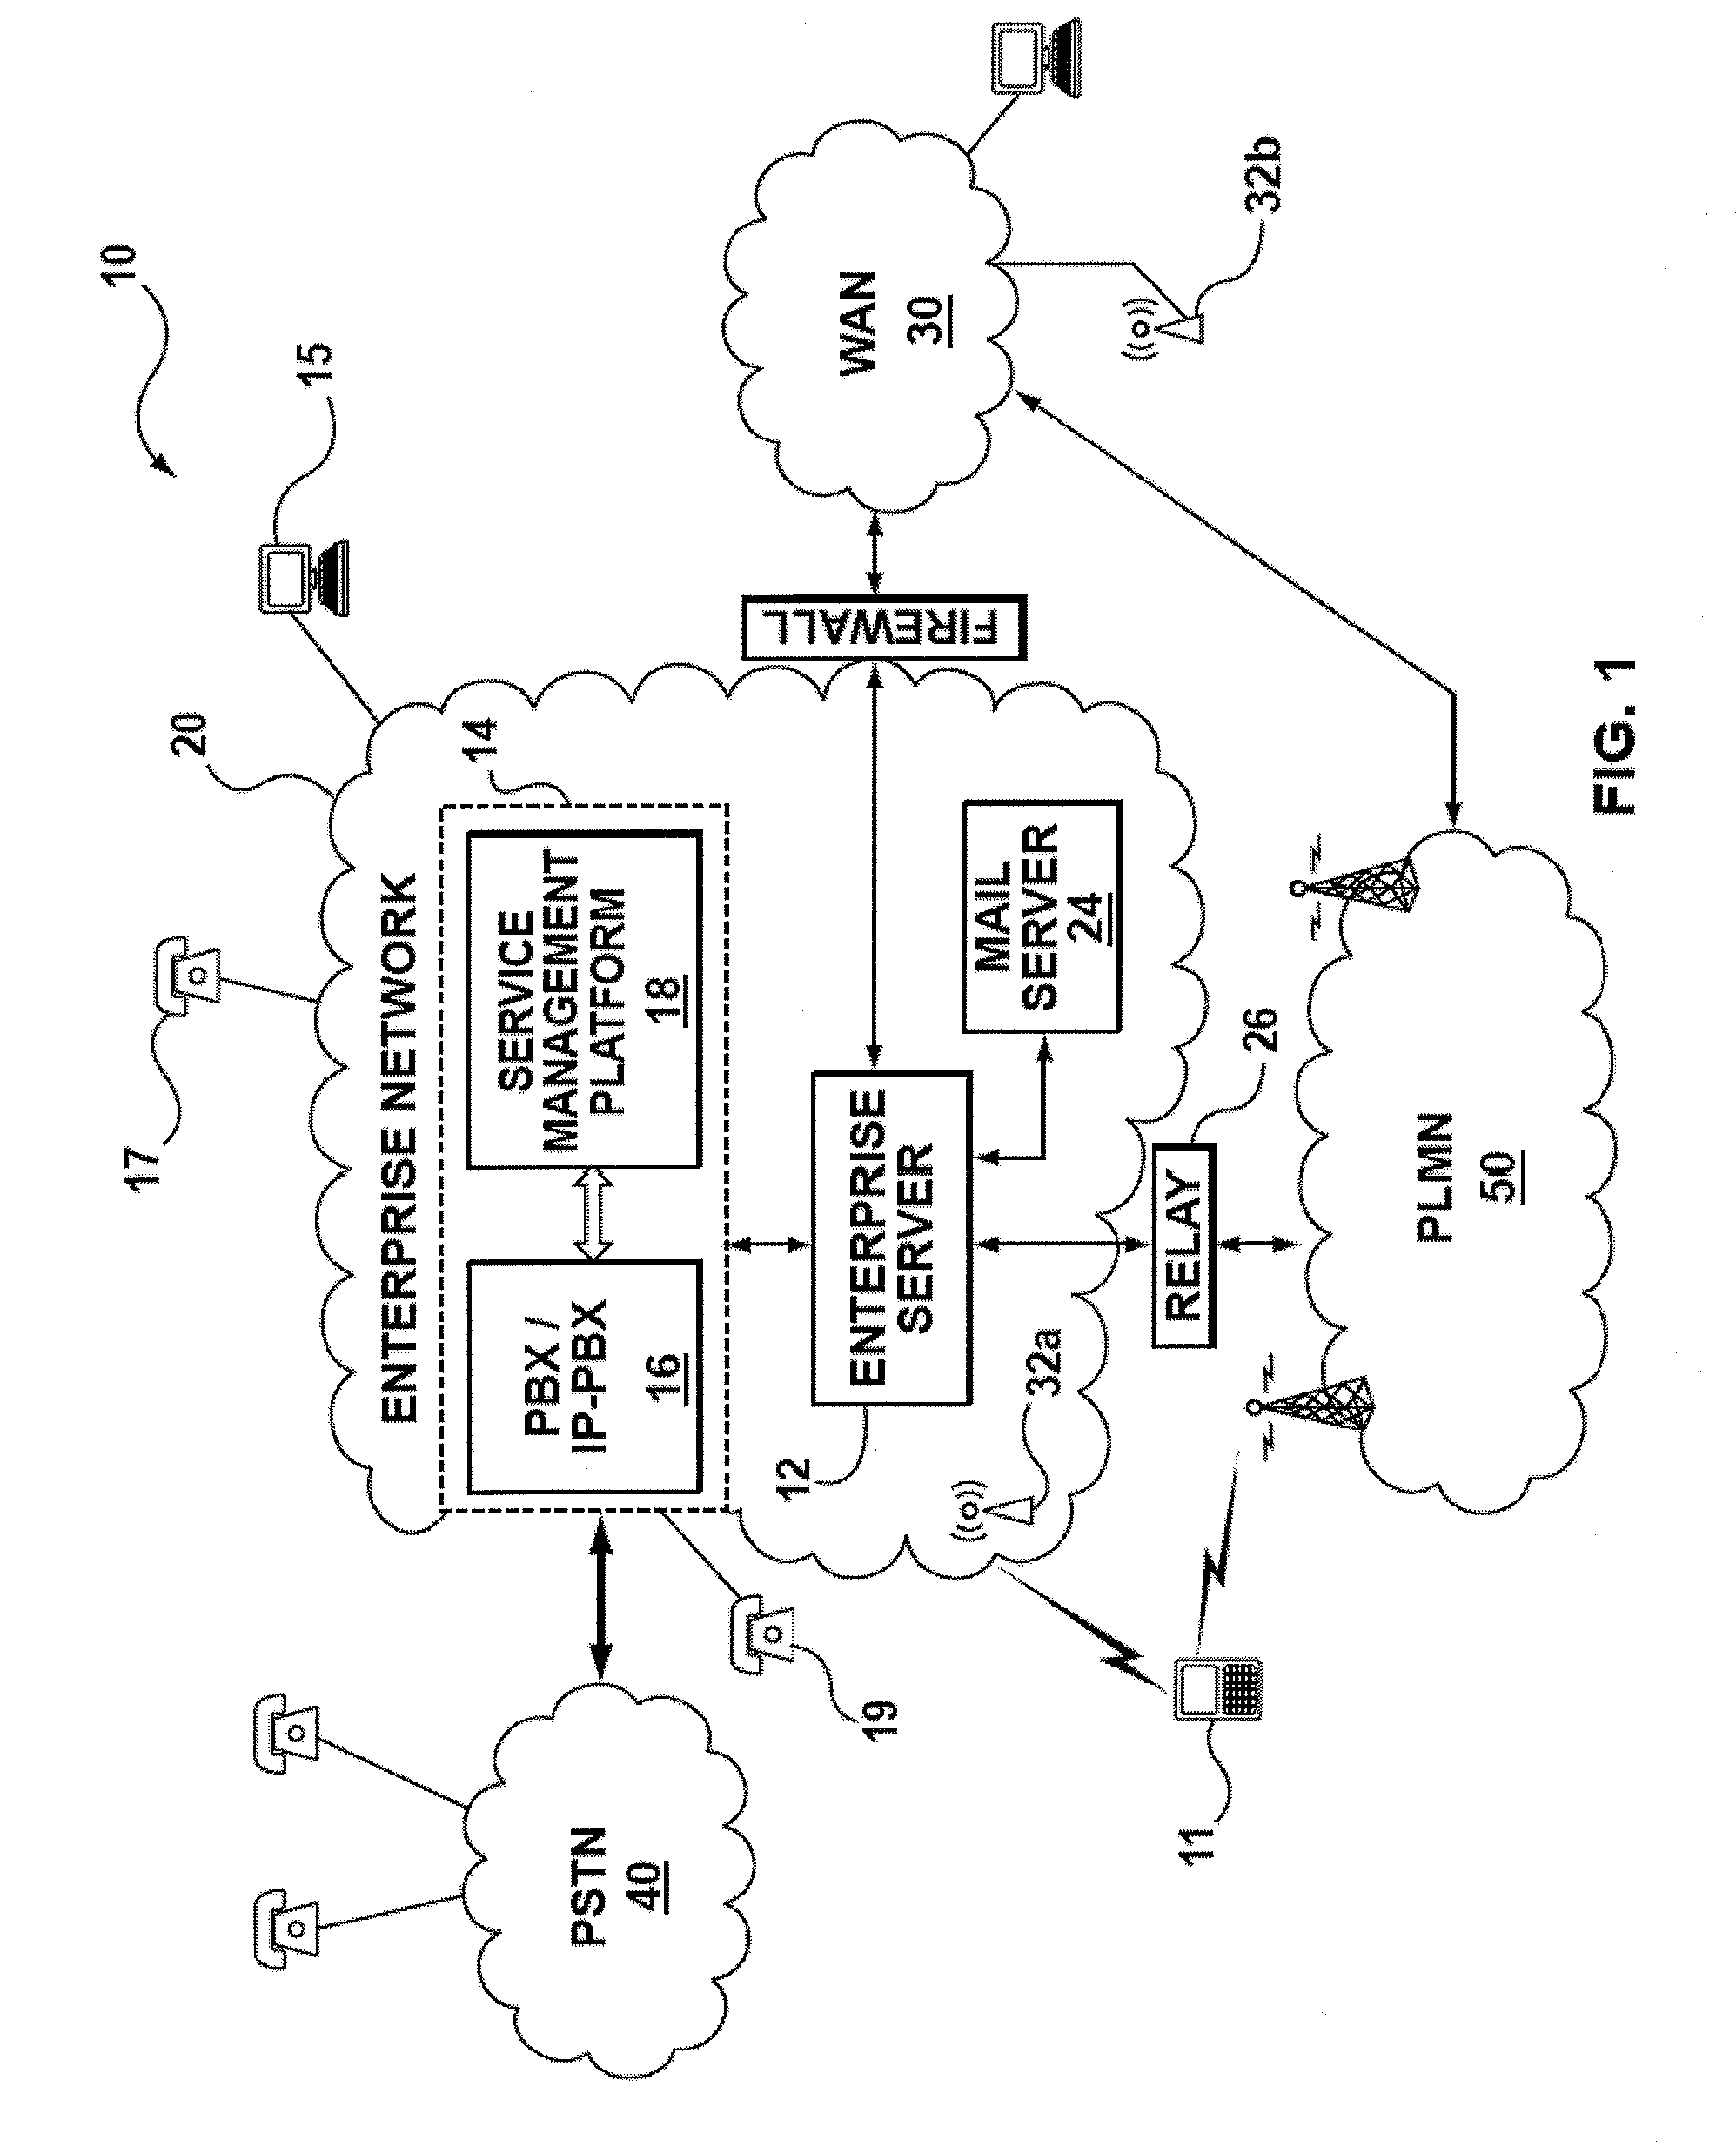 System and method for call management